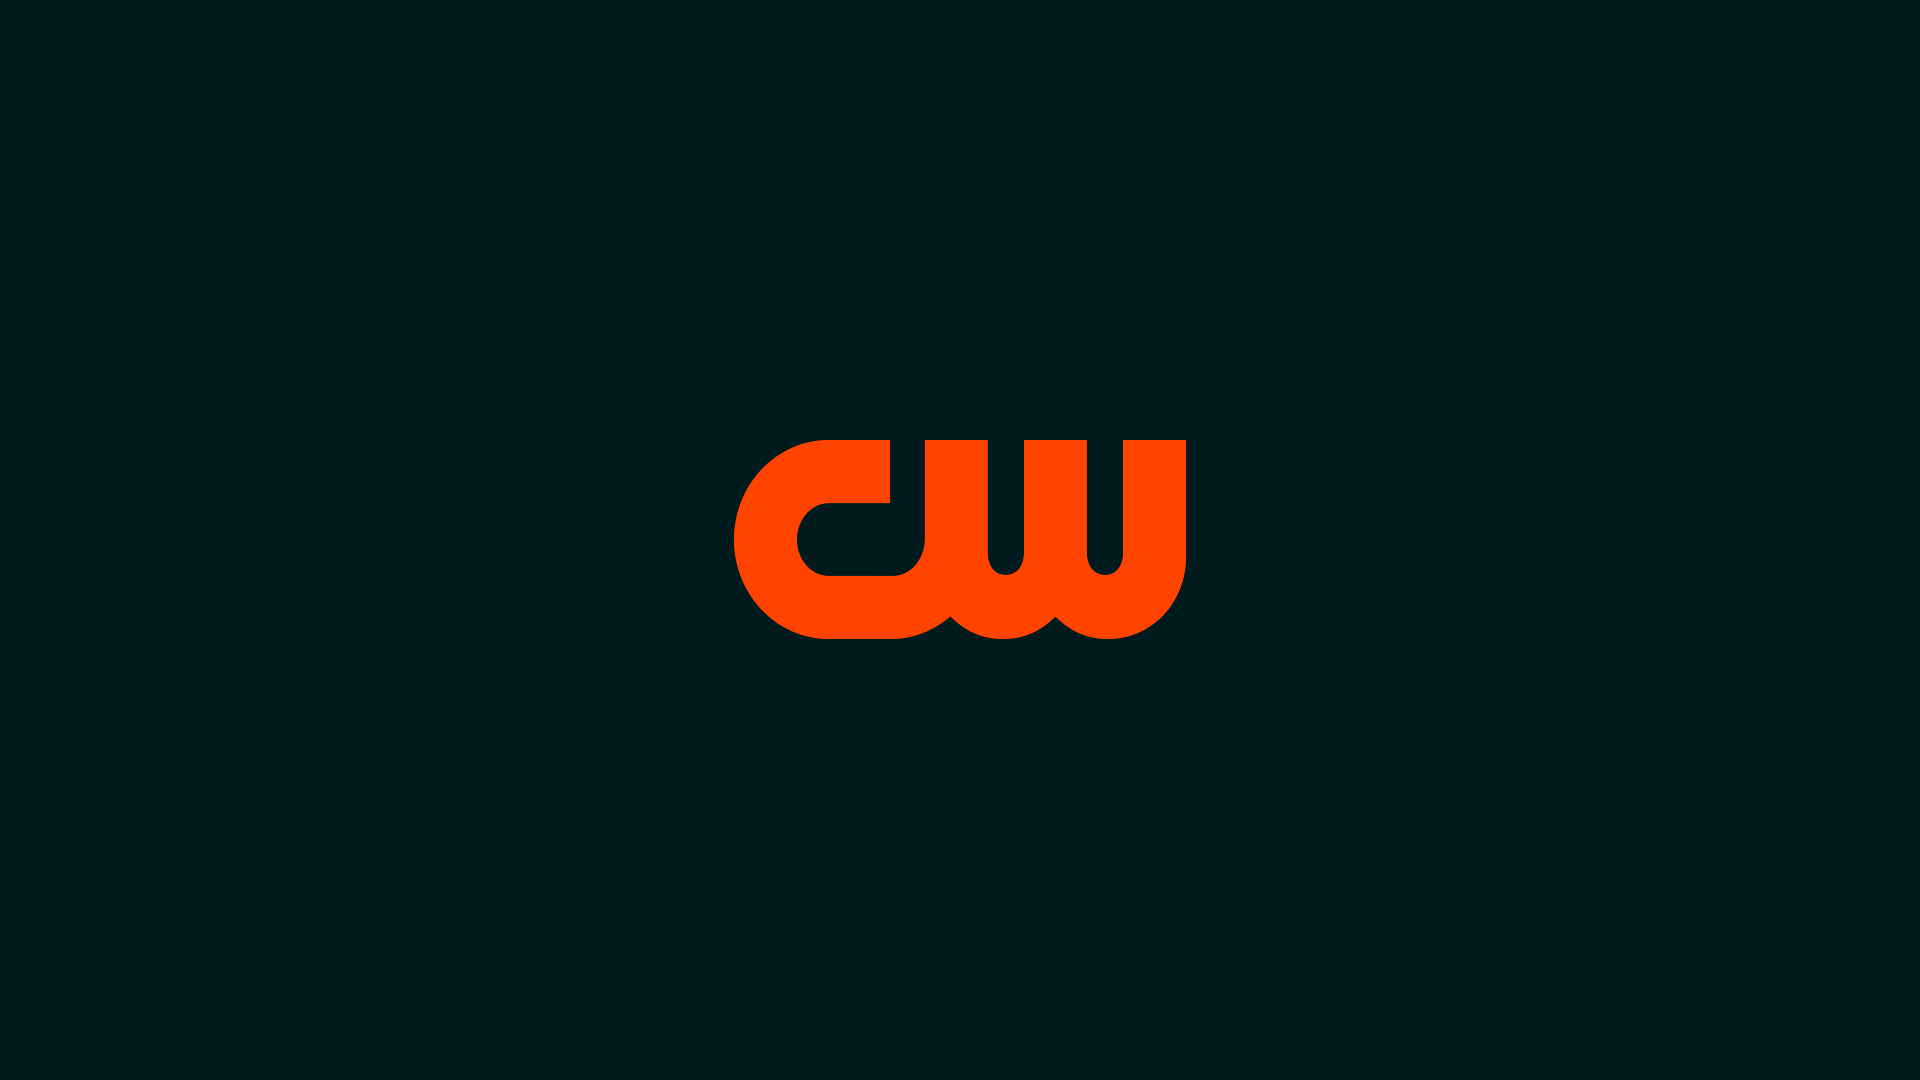 The CW Finally Drops “The” And Goes Red-Orange in Spicy Rebrand